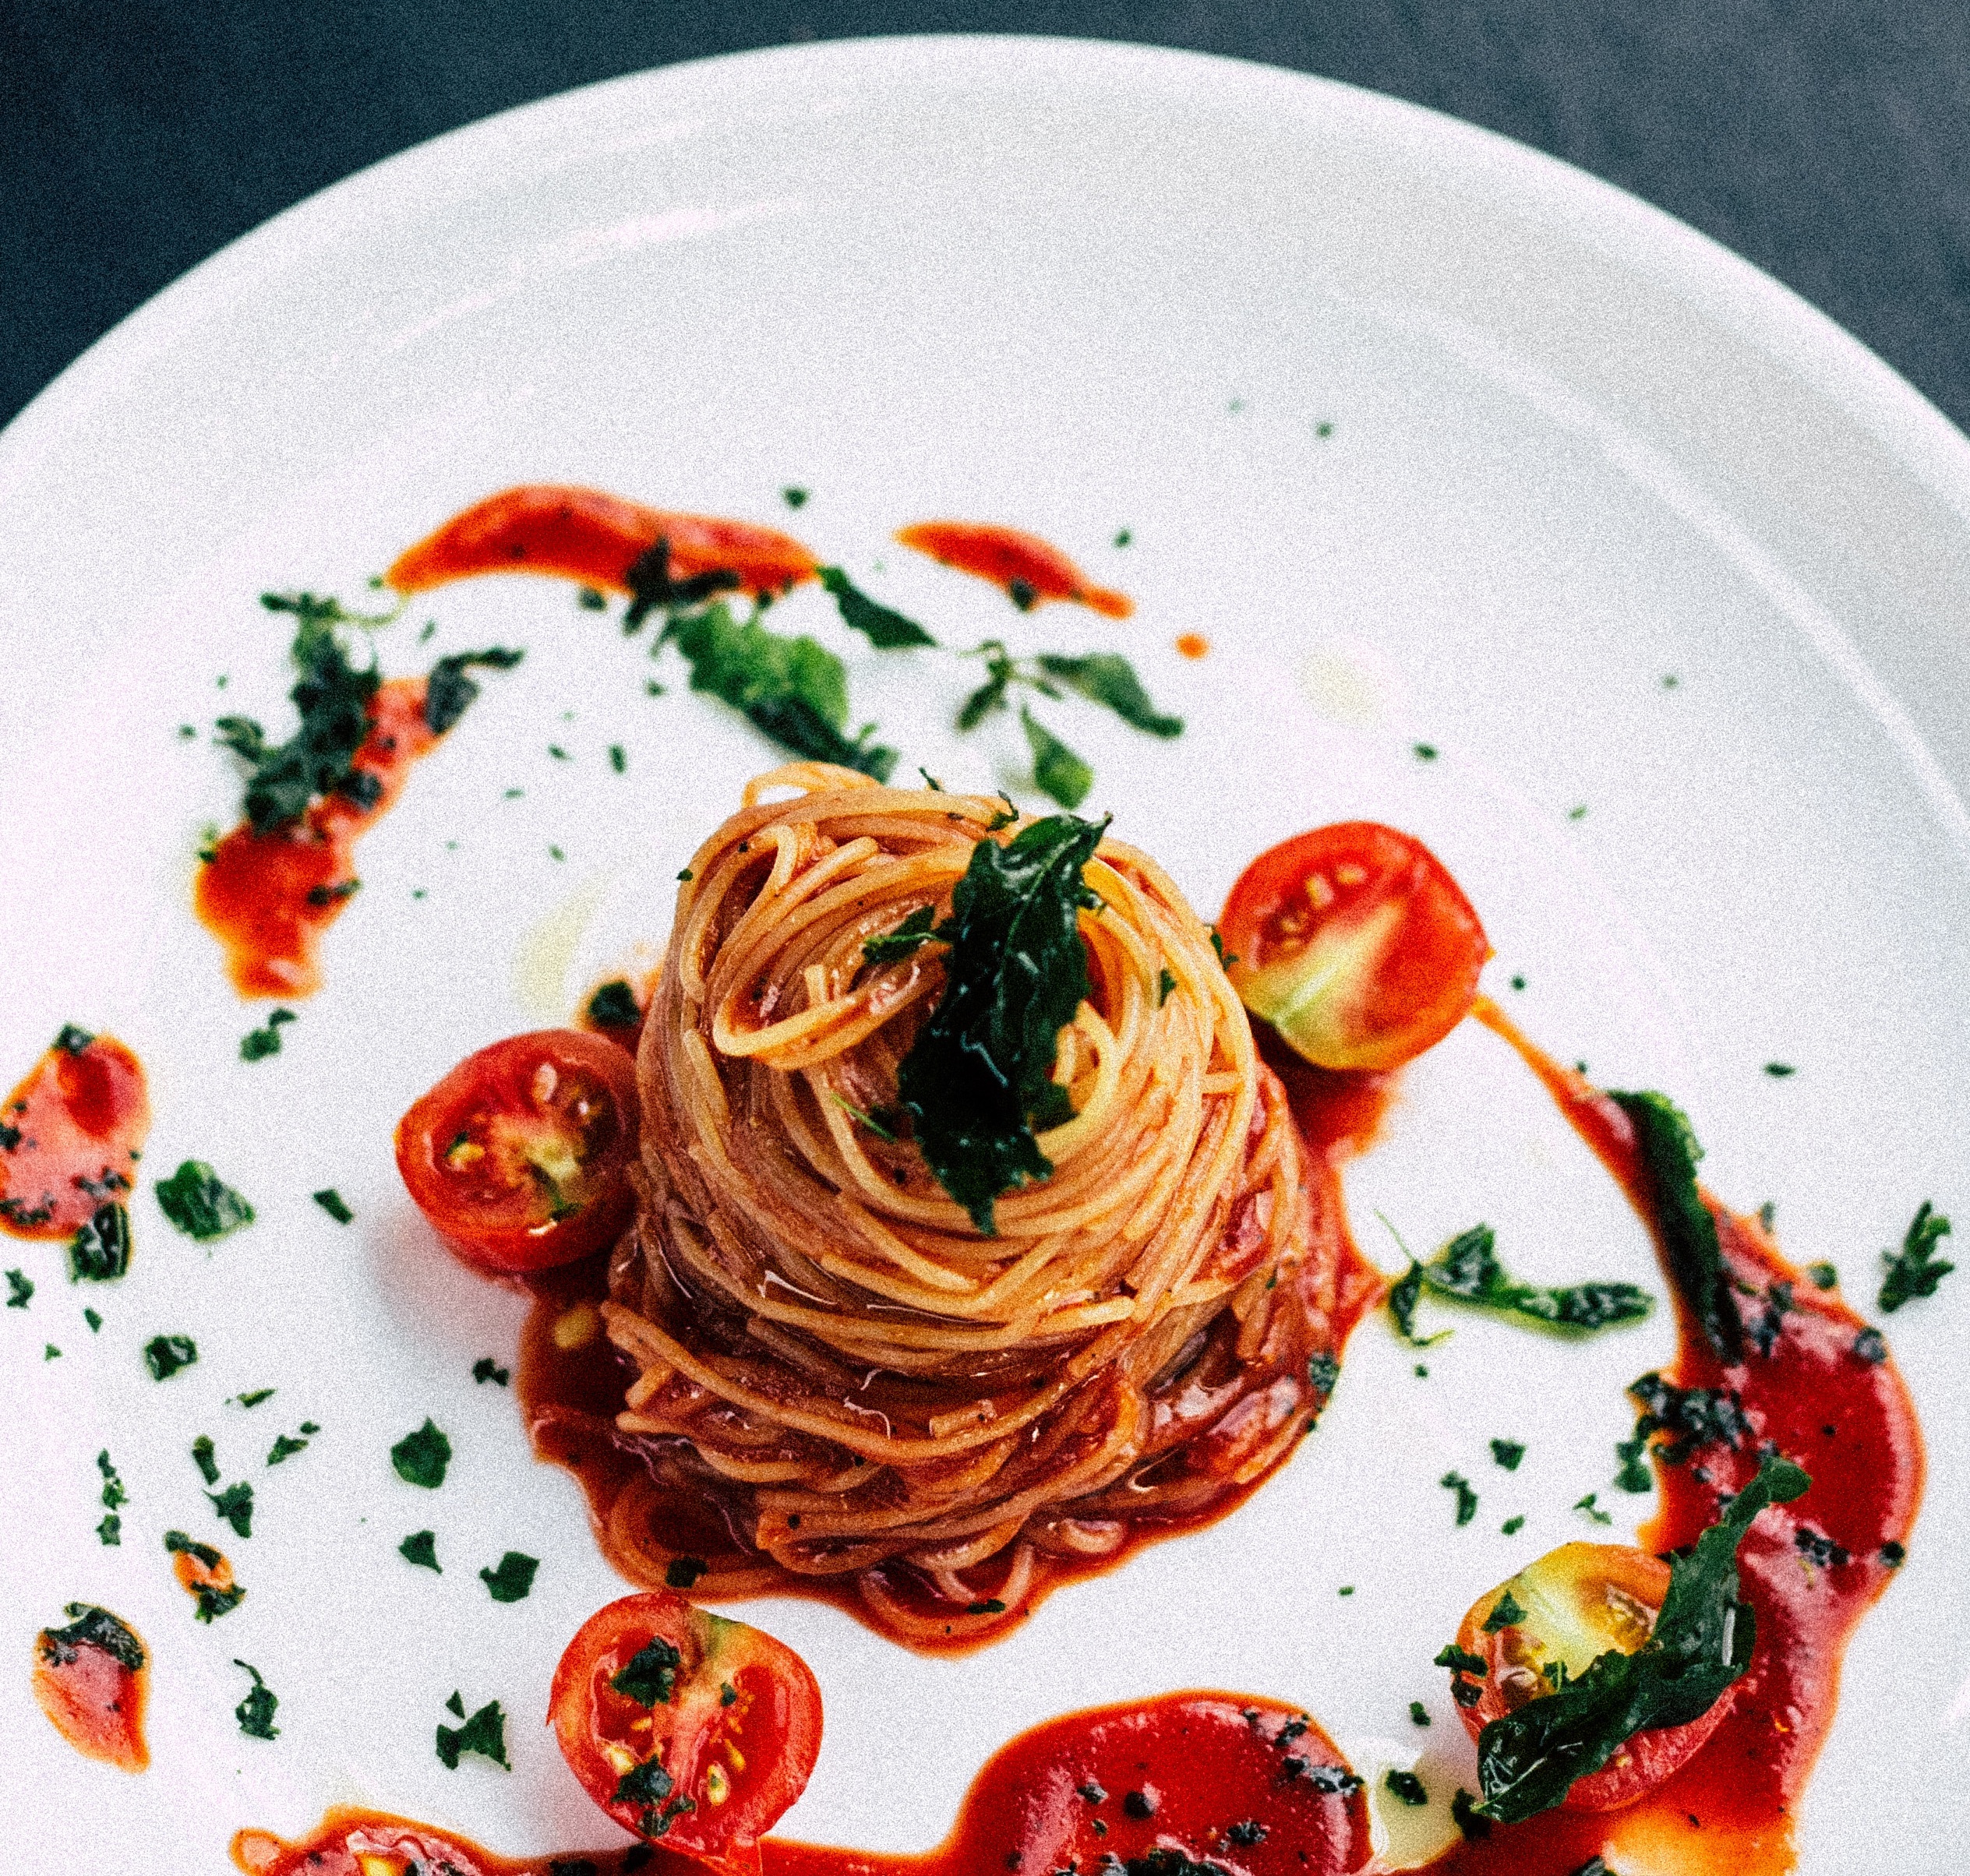 tomato-based-spaghetti-home-cooking-fancy-plating